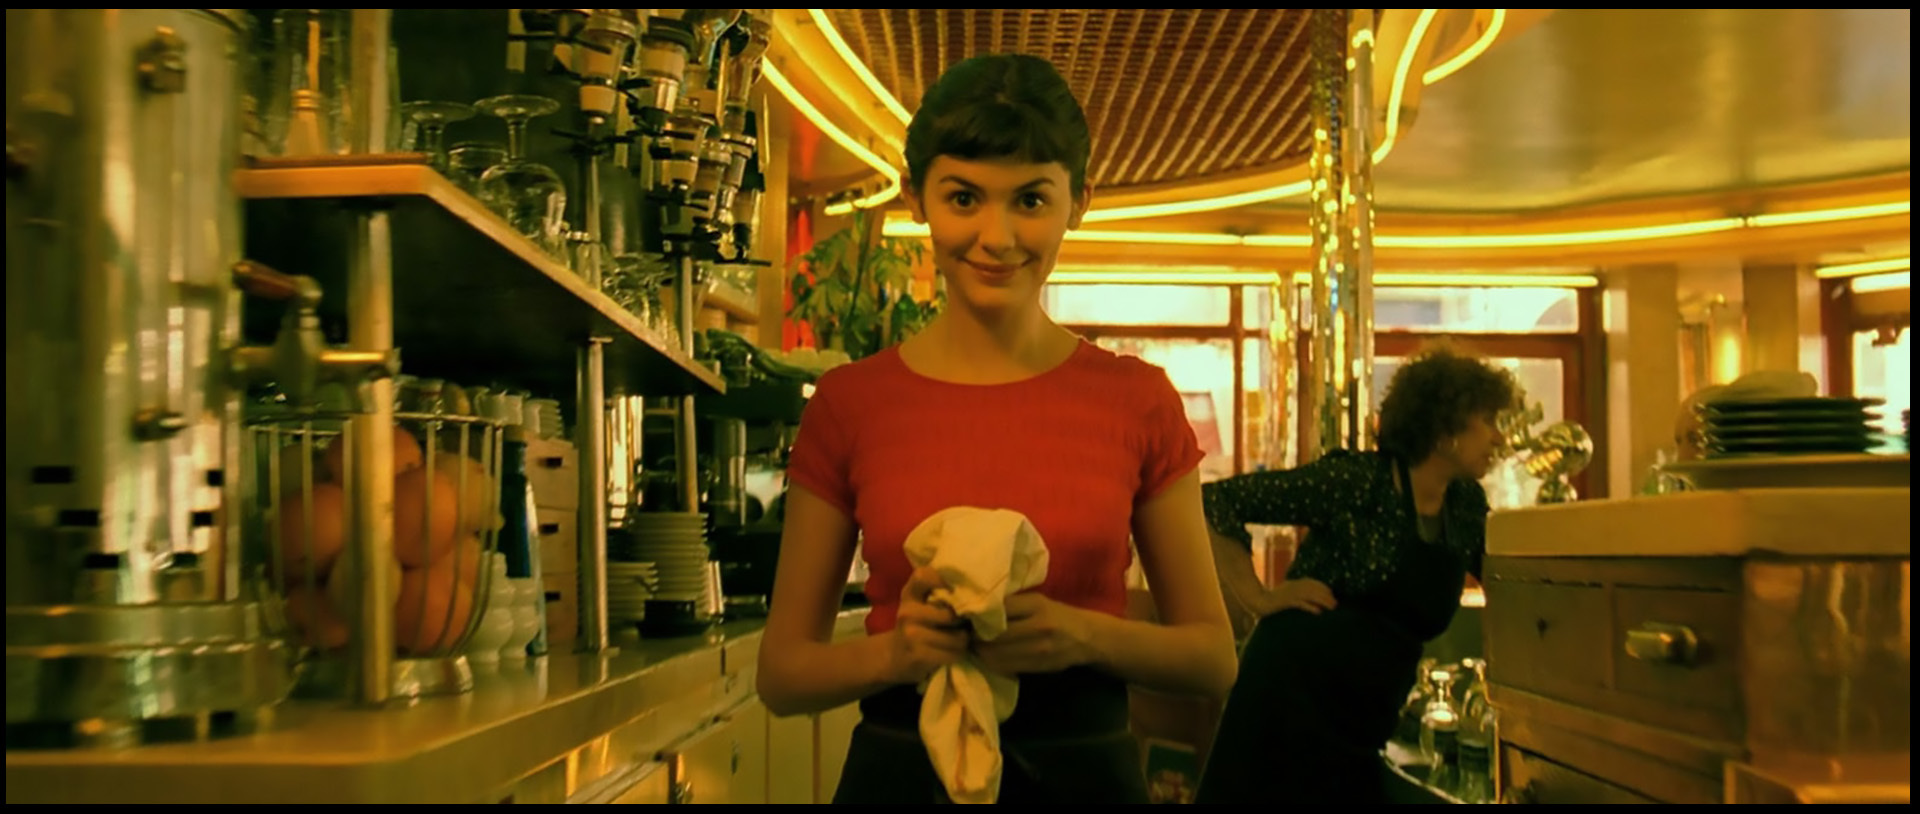 Claire Maurier and Audrey Tautou in Amélie (2001)